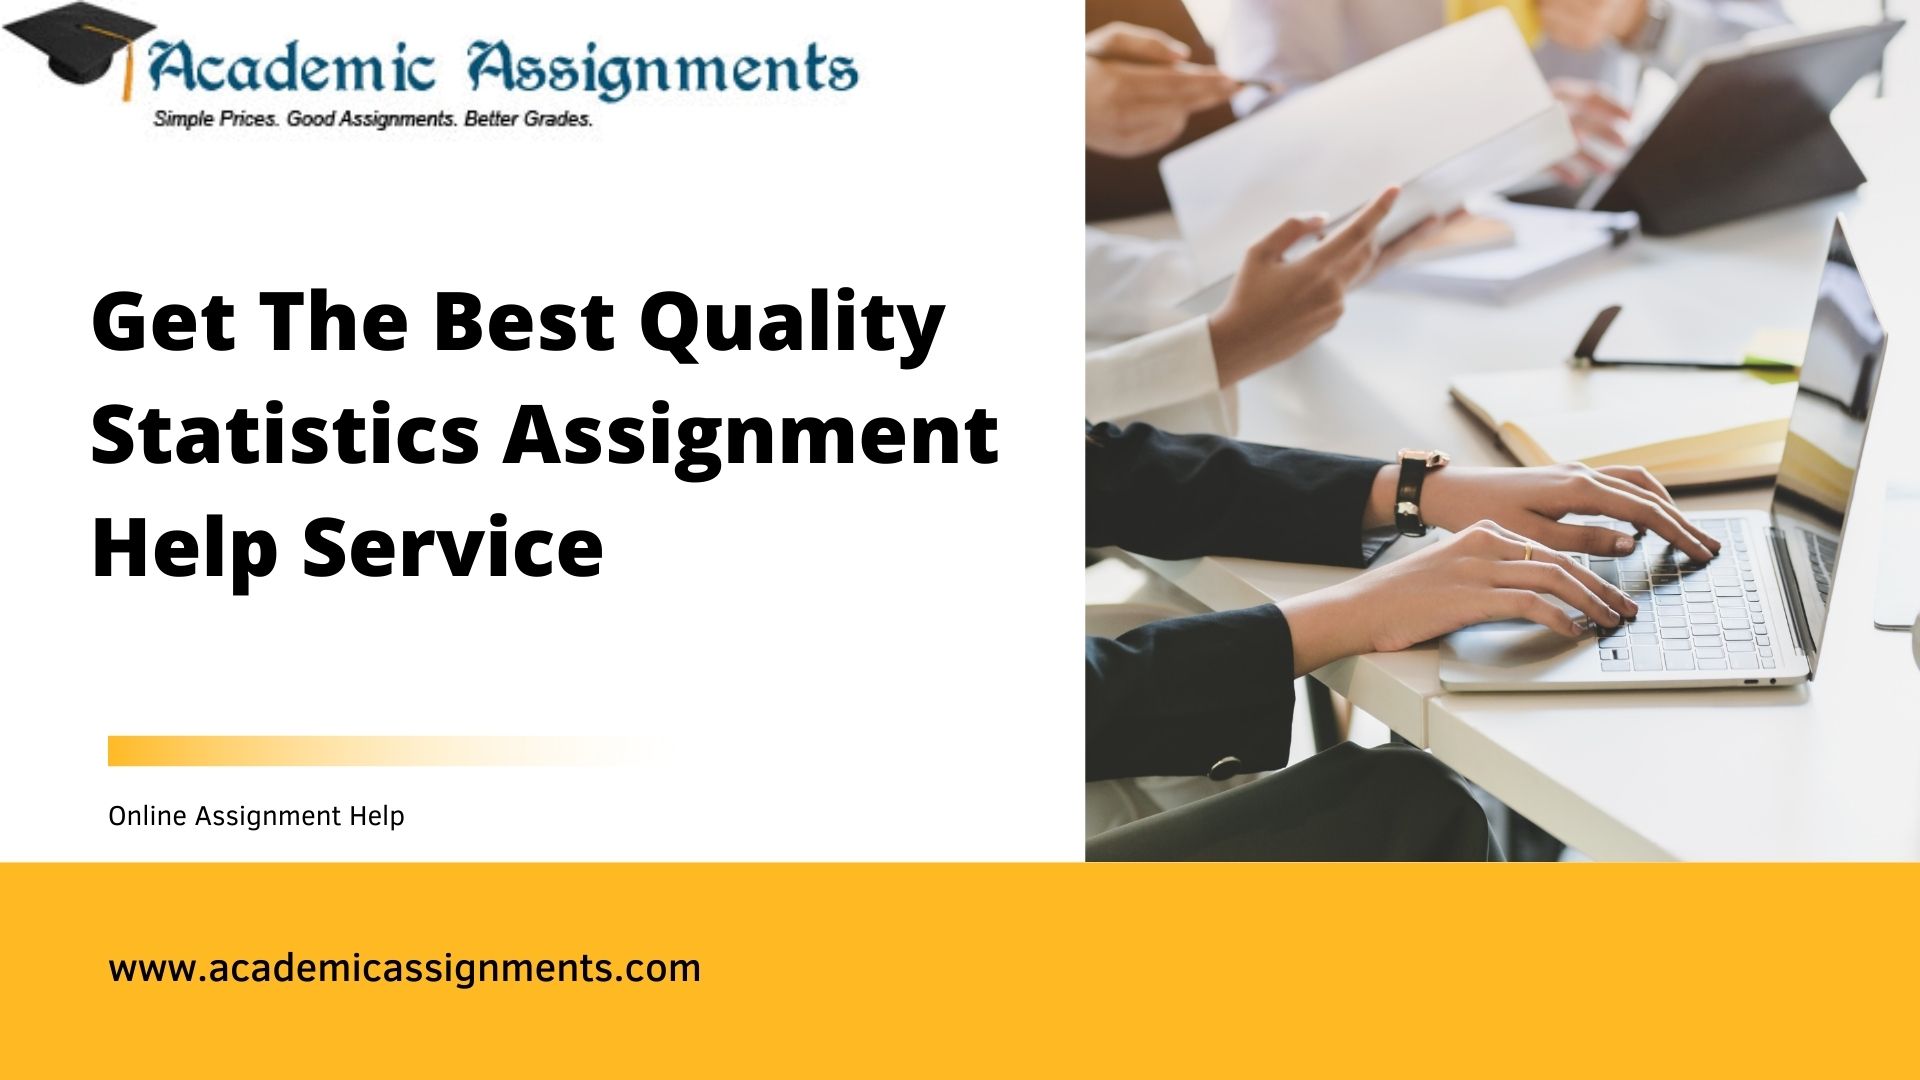 Get The Best Quality Statistics Assignment Help Service